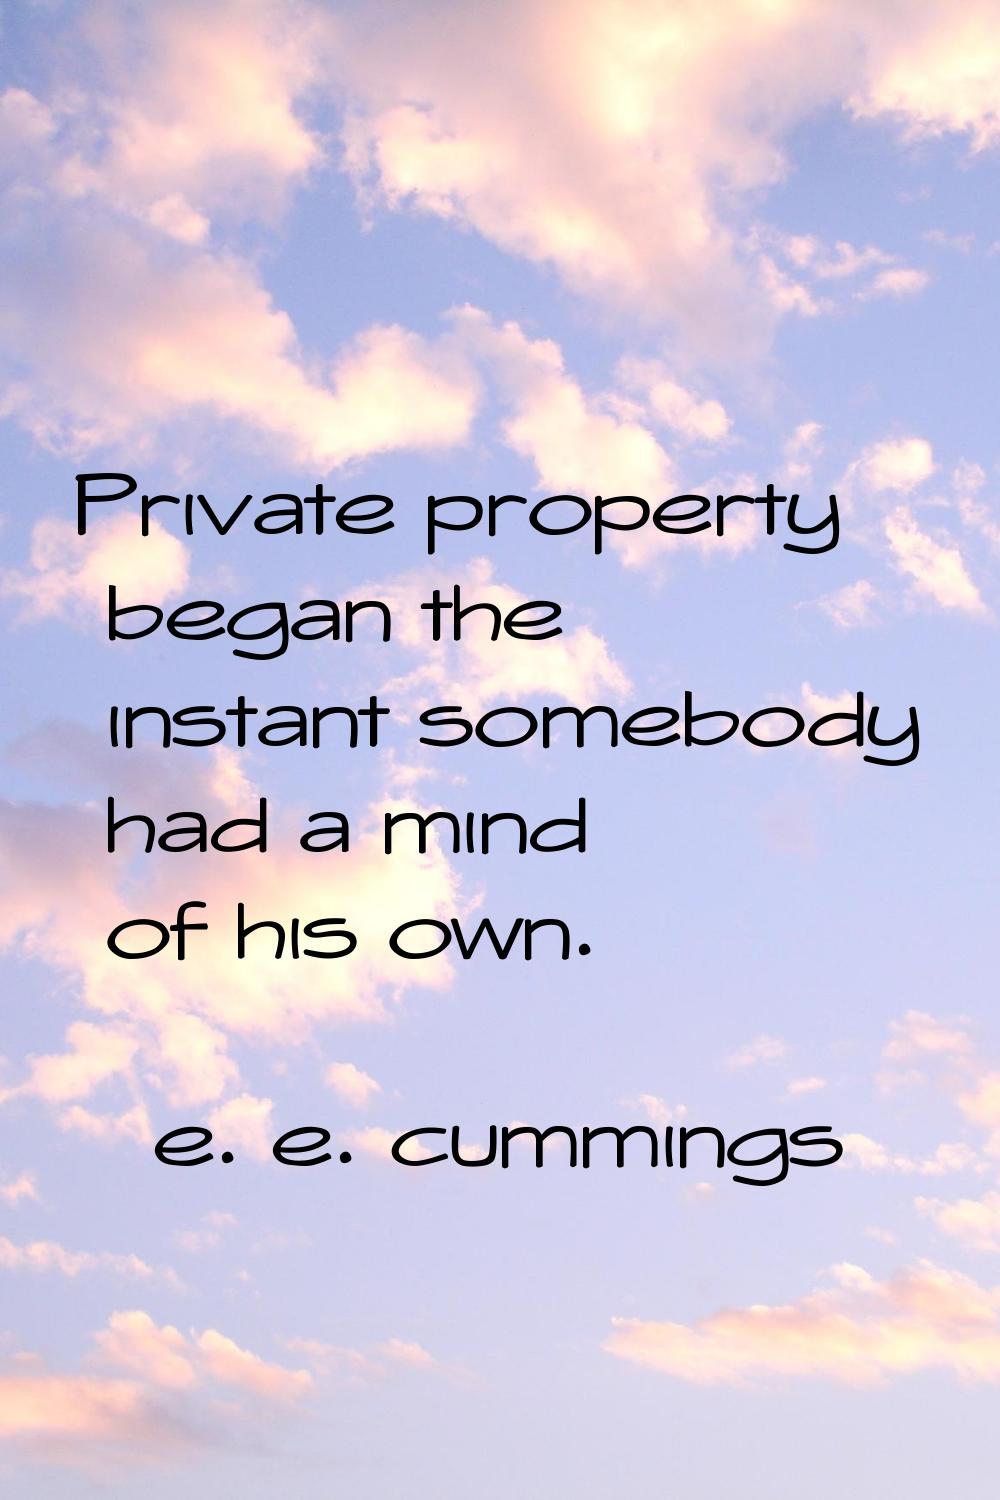 Private property began the instant somebody had a mind of his own.